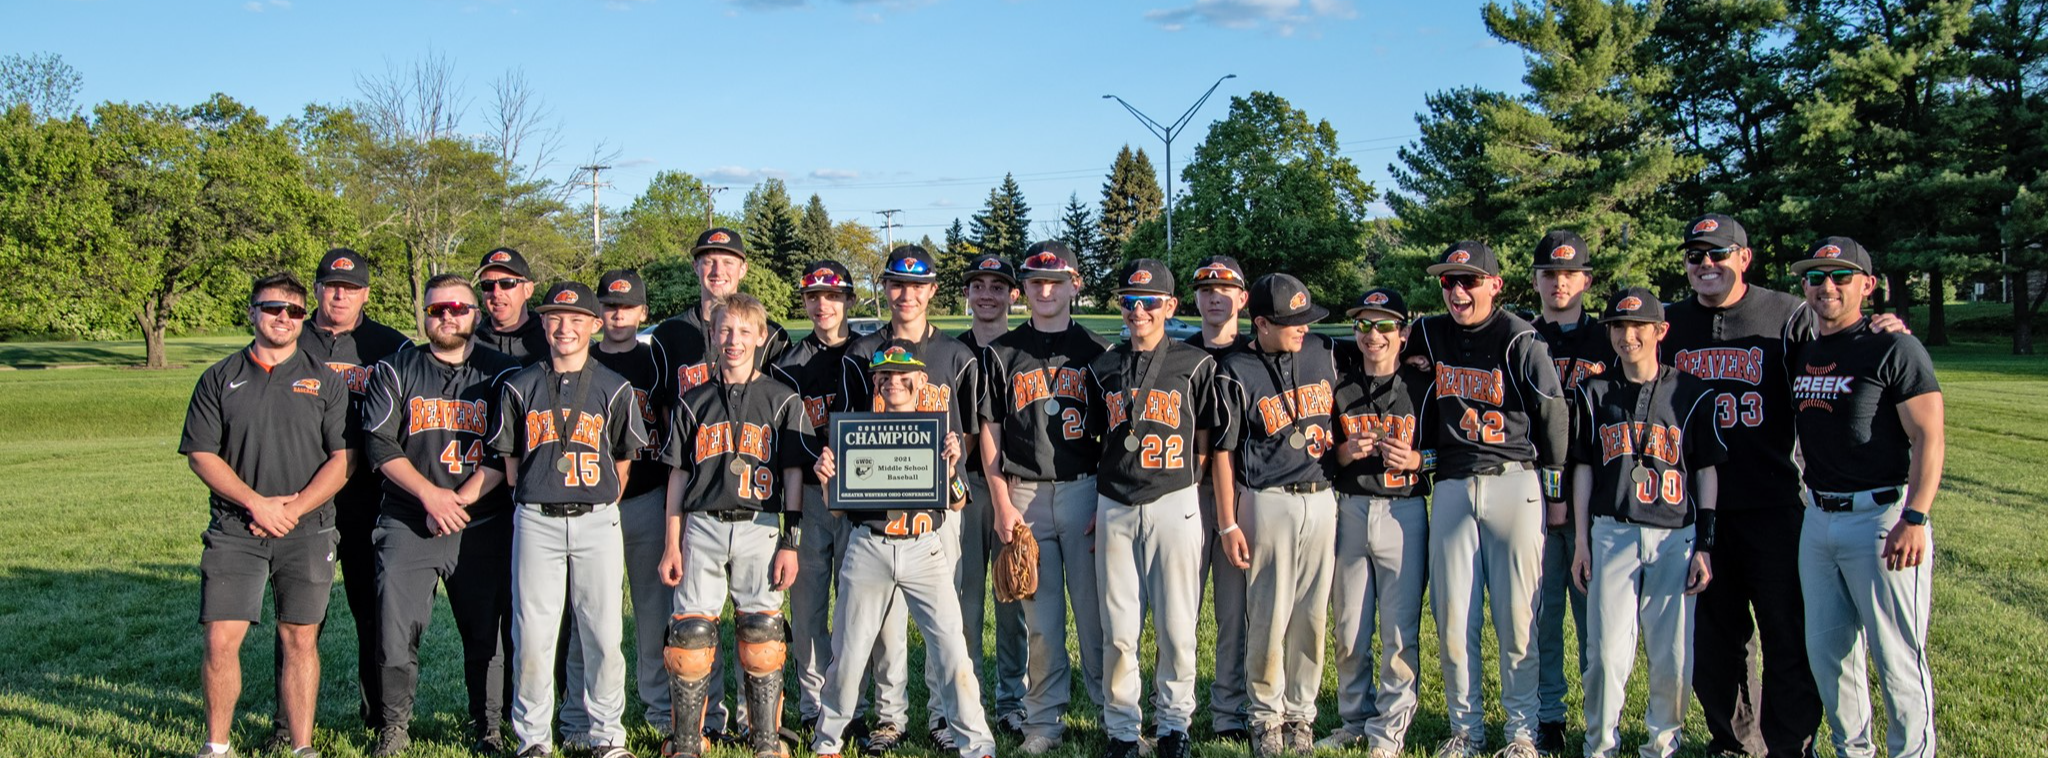 Baseball team hold conference championship plaque